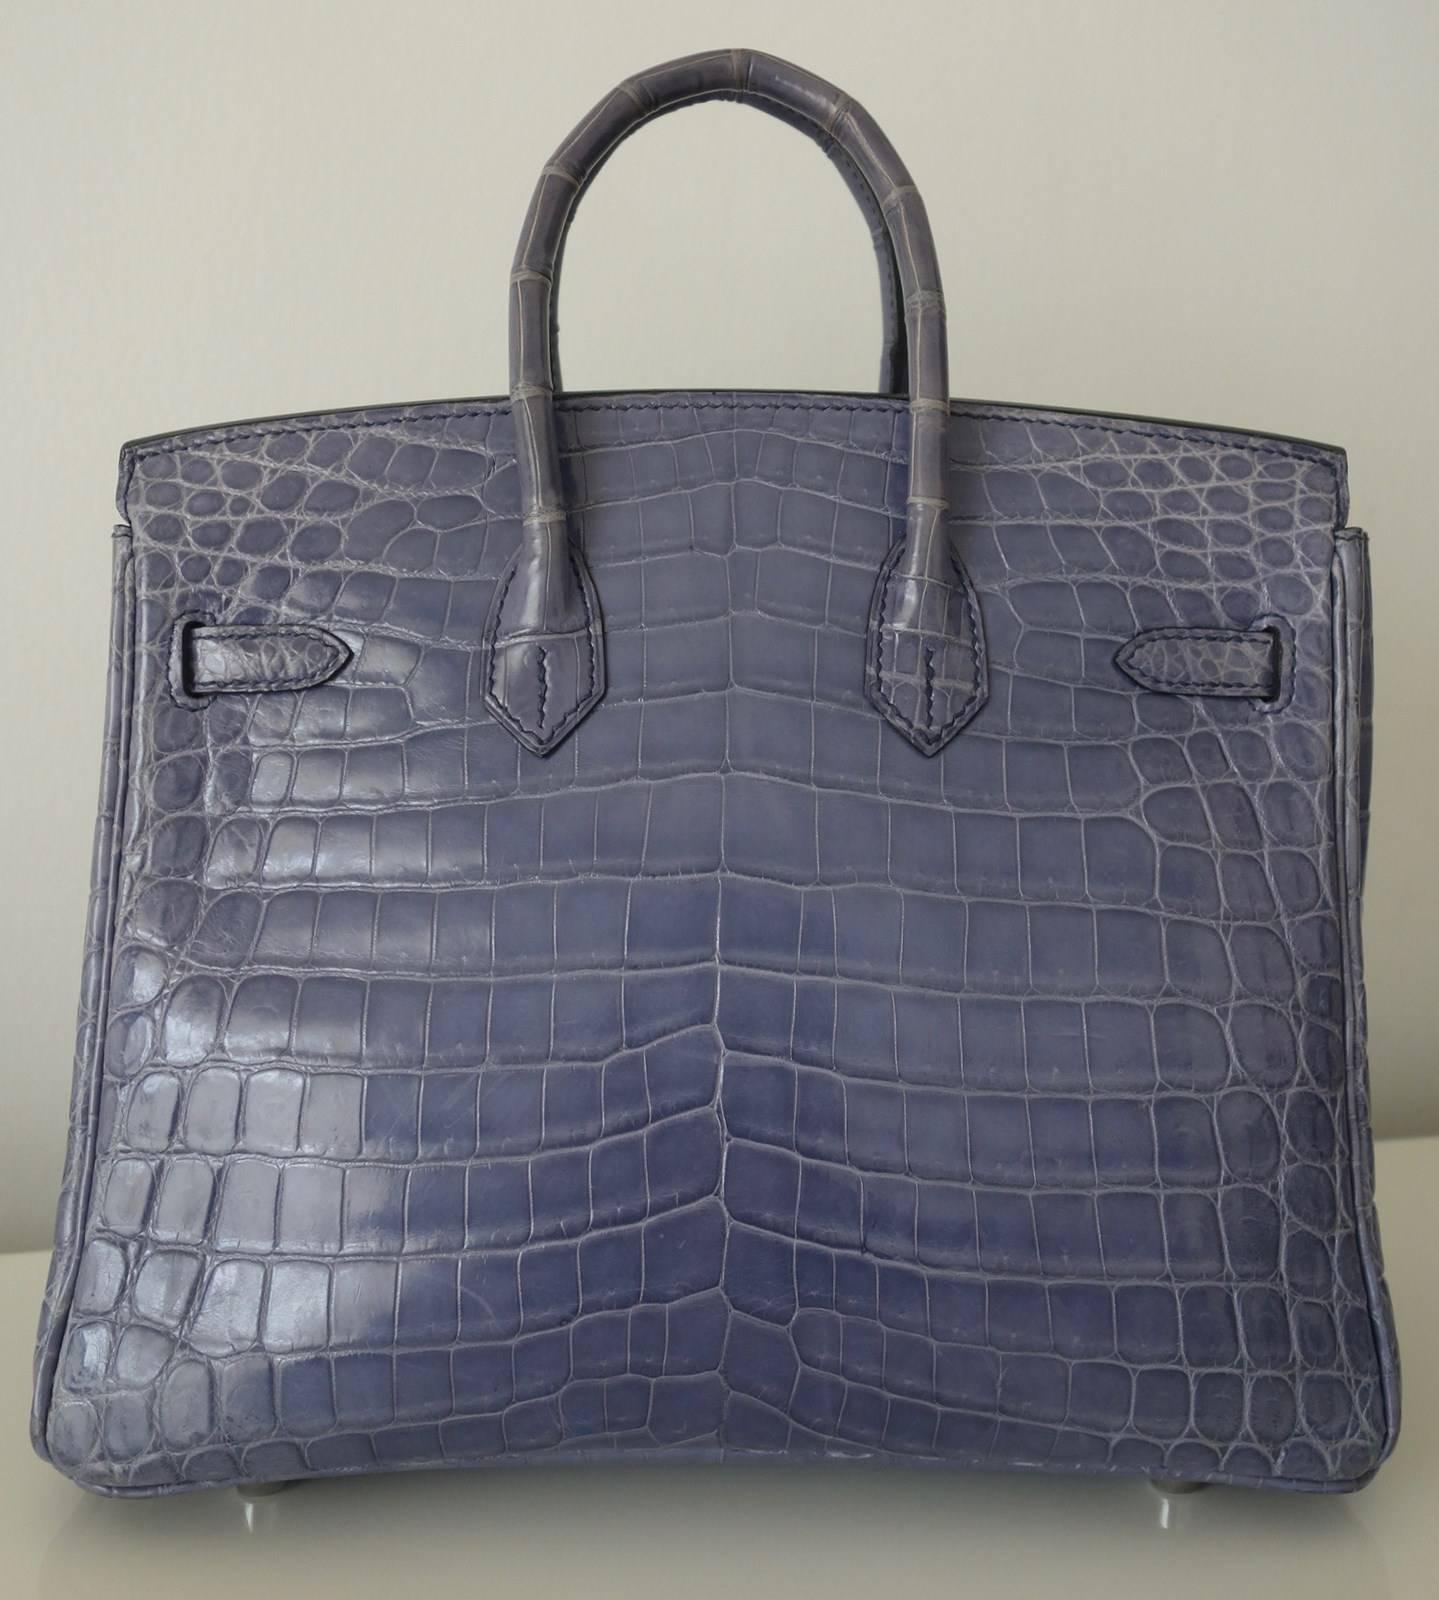 Gorgeous Authentic Hermes Handbag

"BIRKIN"

Made in France

Stamp K in a square

Made of Crocdile Niloticus skin and Palladium Hardware

Colorway: Bleu Brighton. Not made anymore !

Lined wih matching leather

1 main compartment, 1